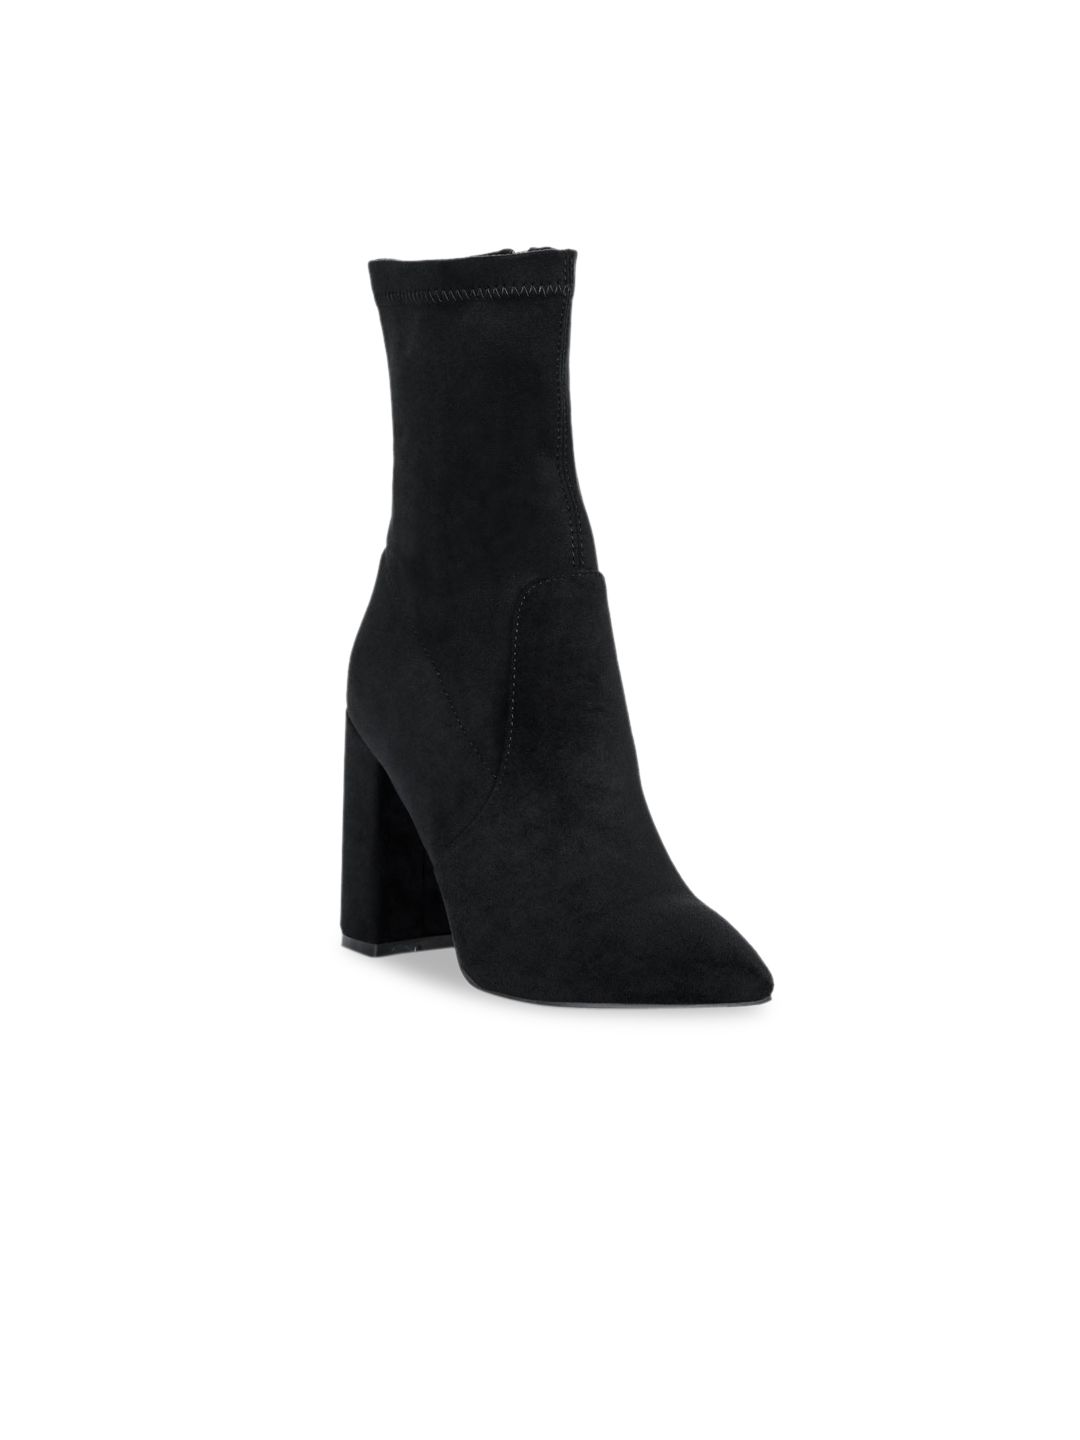 London Rag Women Black Suede Solid High Block Heeled Boots Price in India